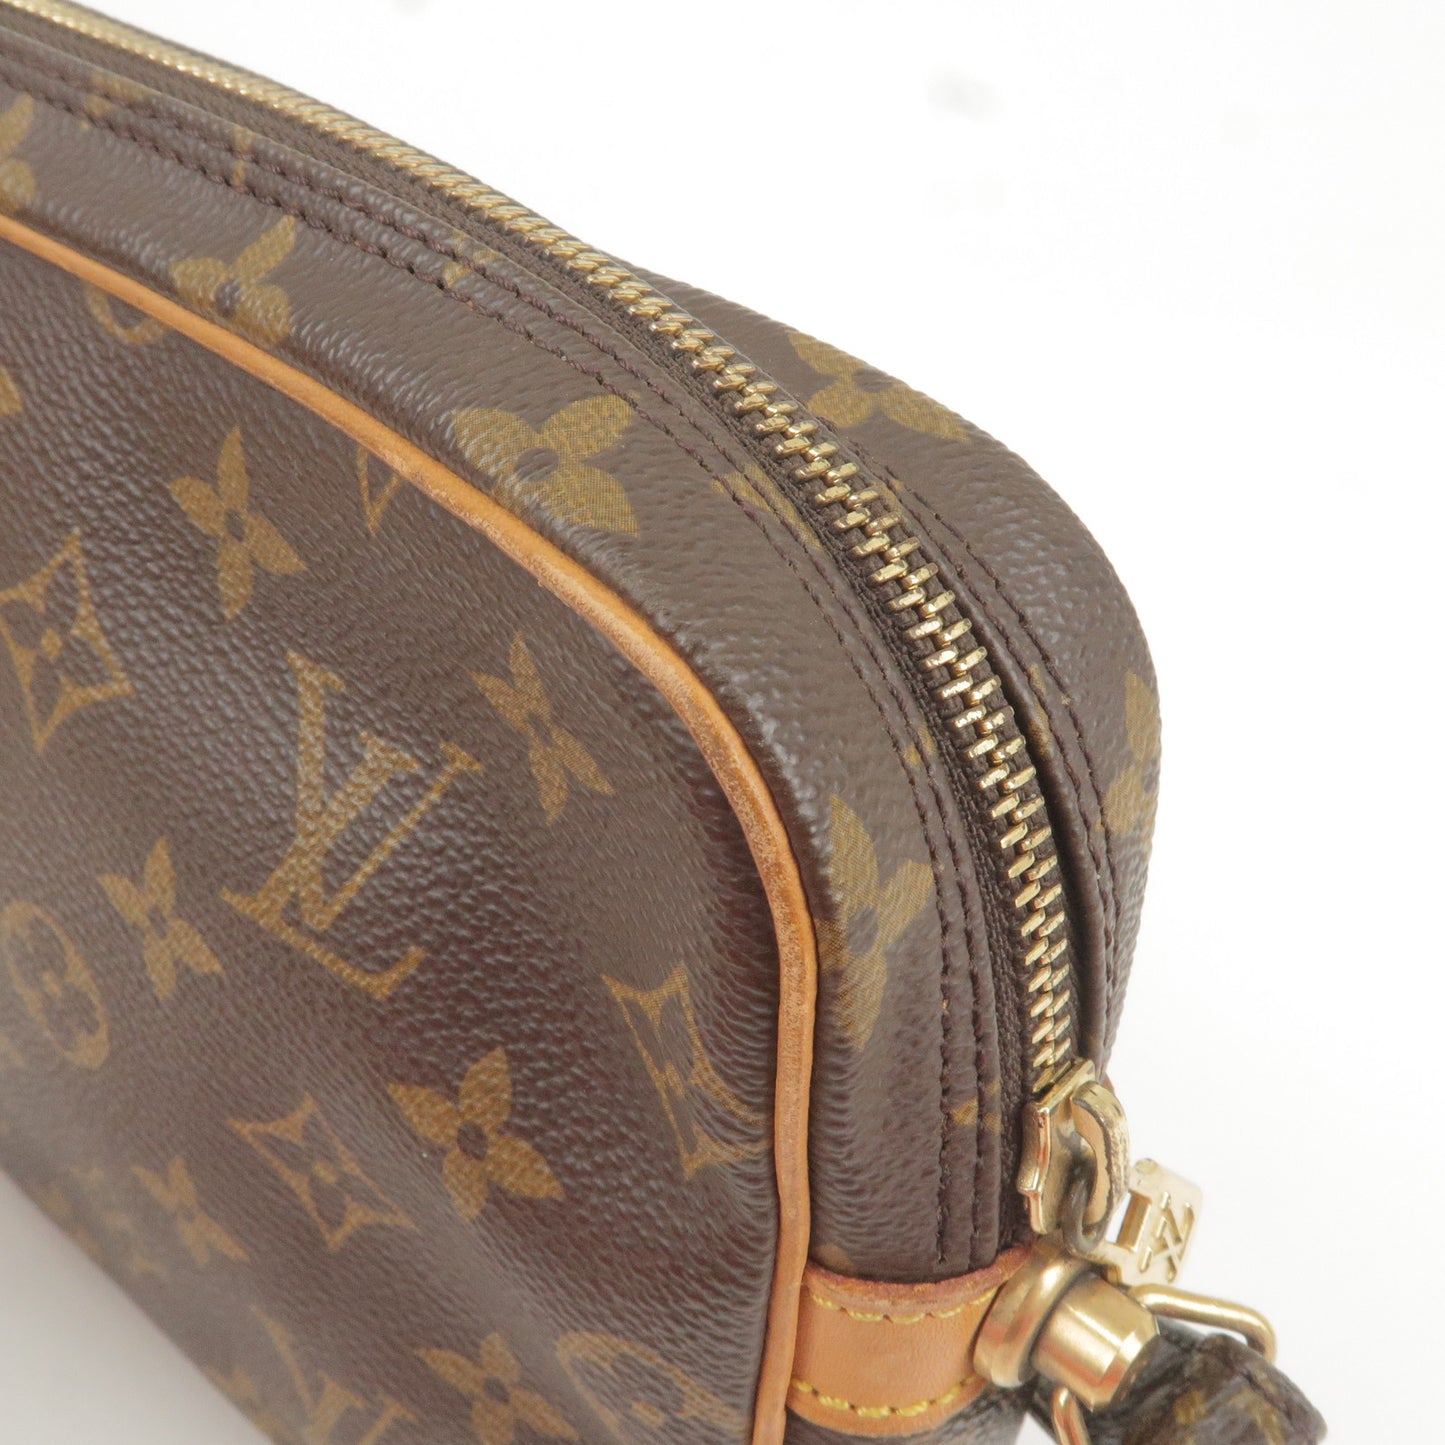 Review: Louis Vuitton Clutch Monogram Marly Dragonne with PVC bag